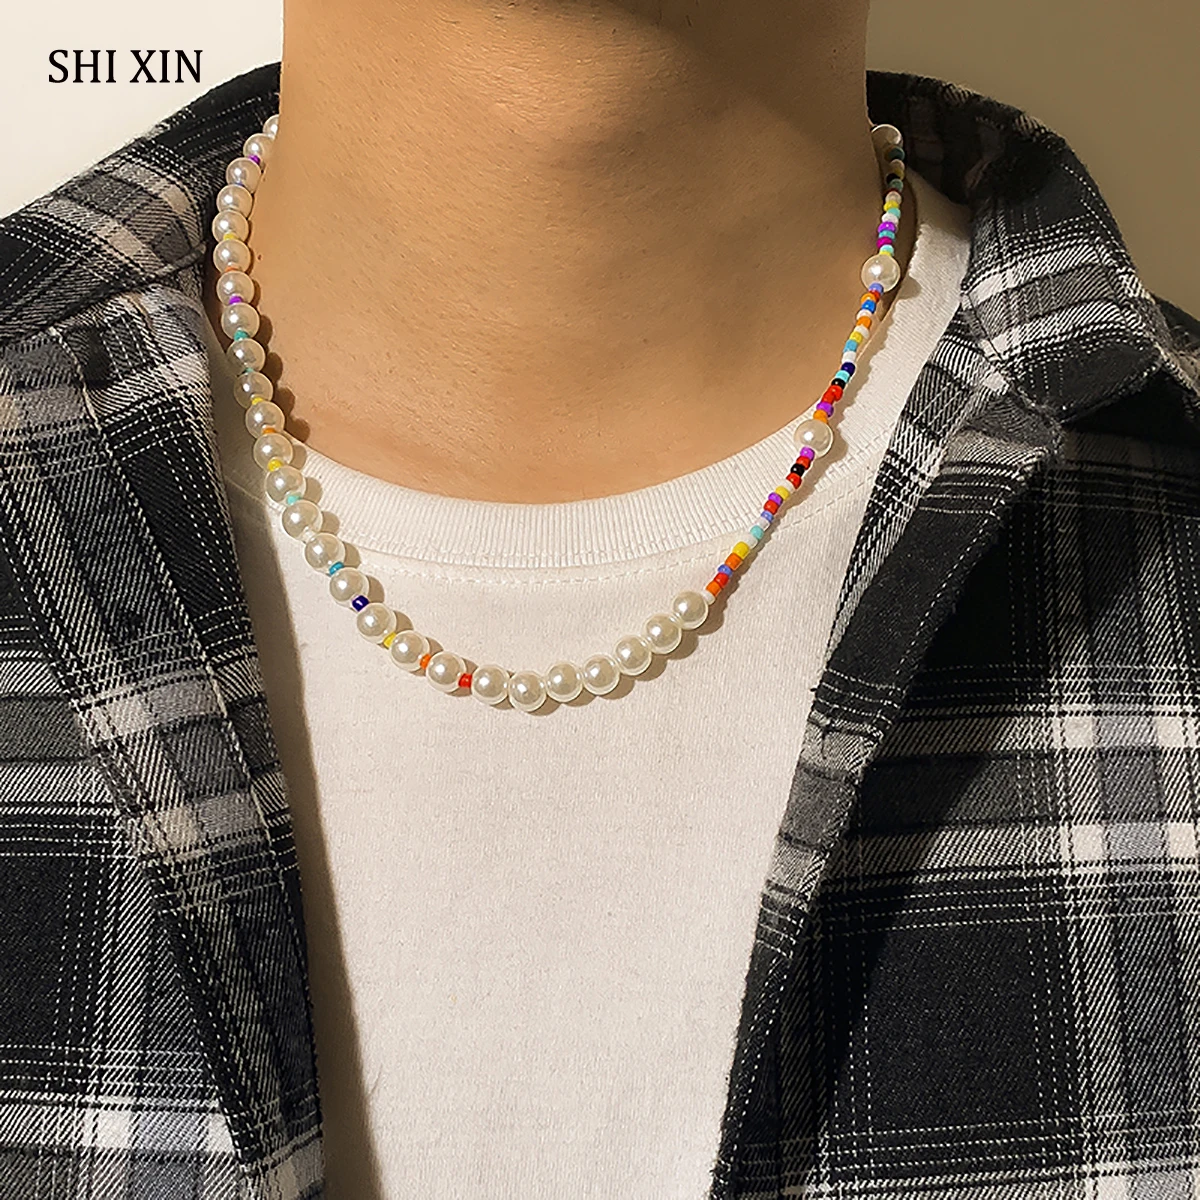 

SHIXIN Boho Asymmetry Pearl Choker Necklace for Women/Men Fashion Summer Colorful Beads Necklace 2021 Jewelry for Neck Girl Gift